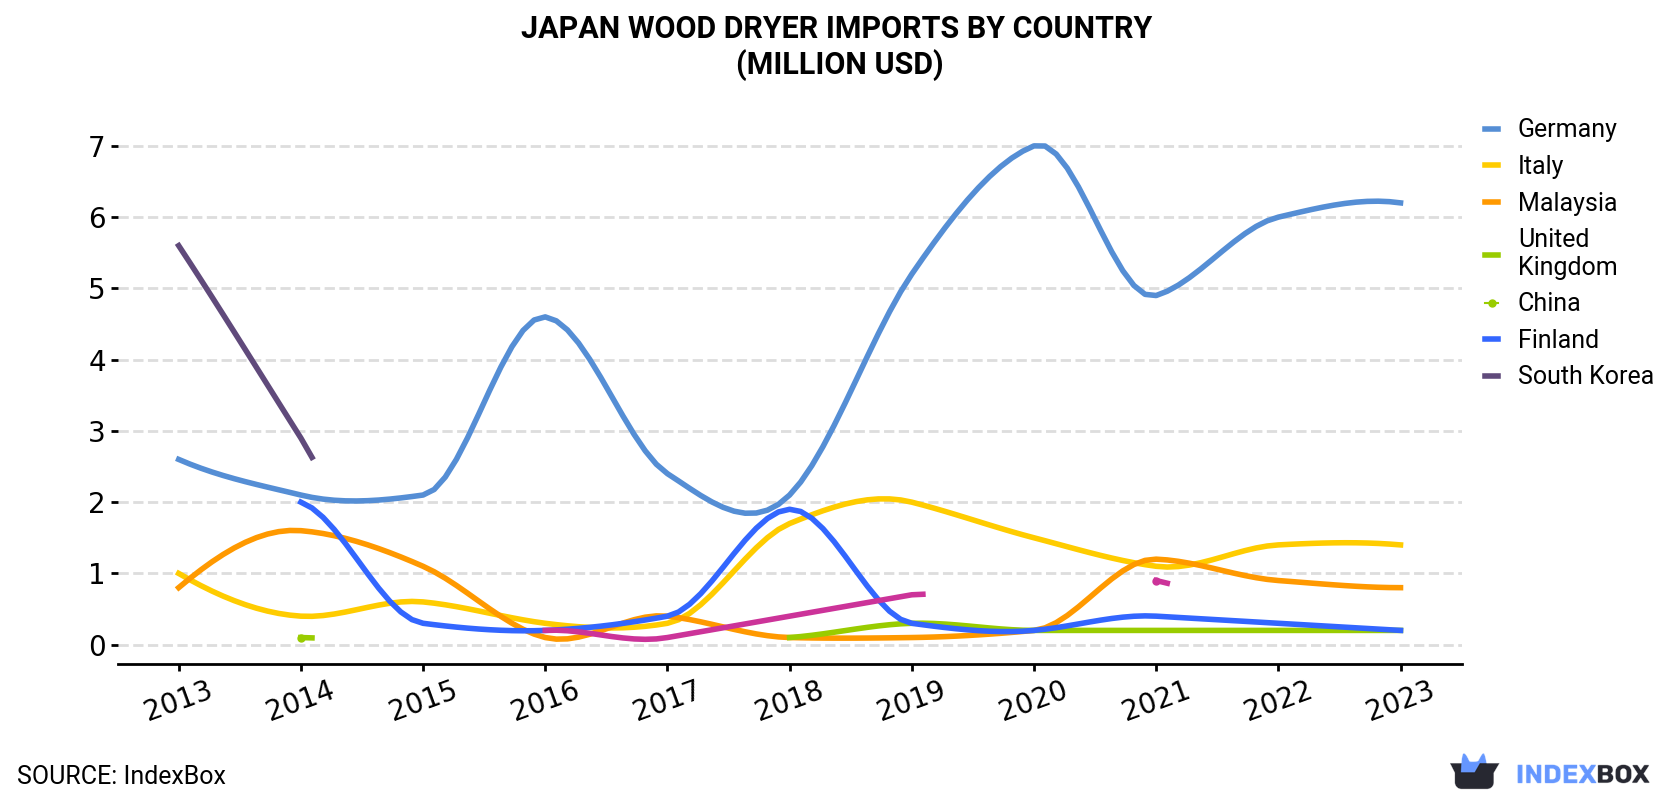 Japan Wood Dryer Imports By Country (Million USD)